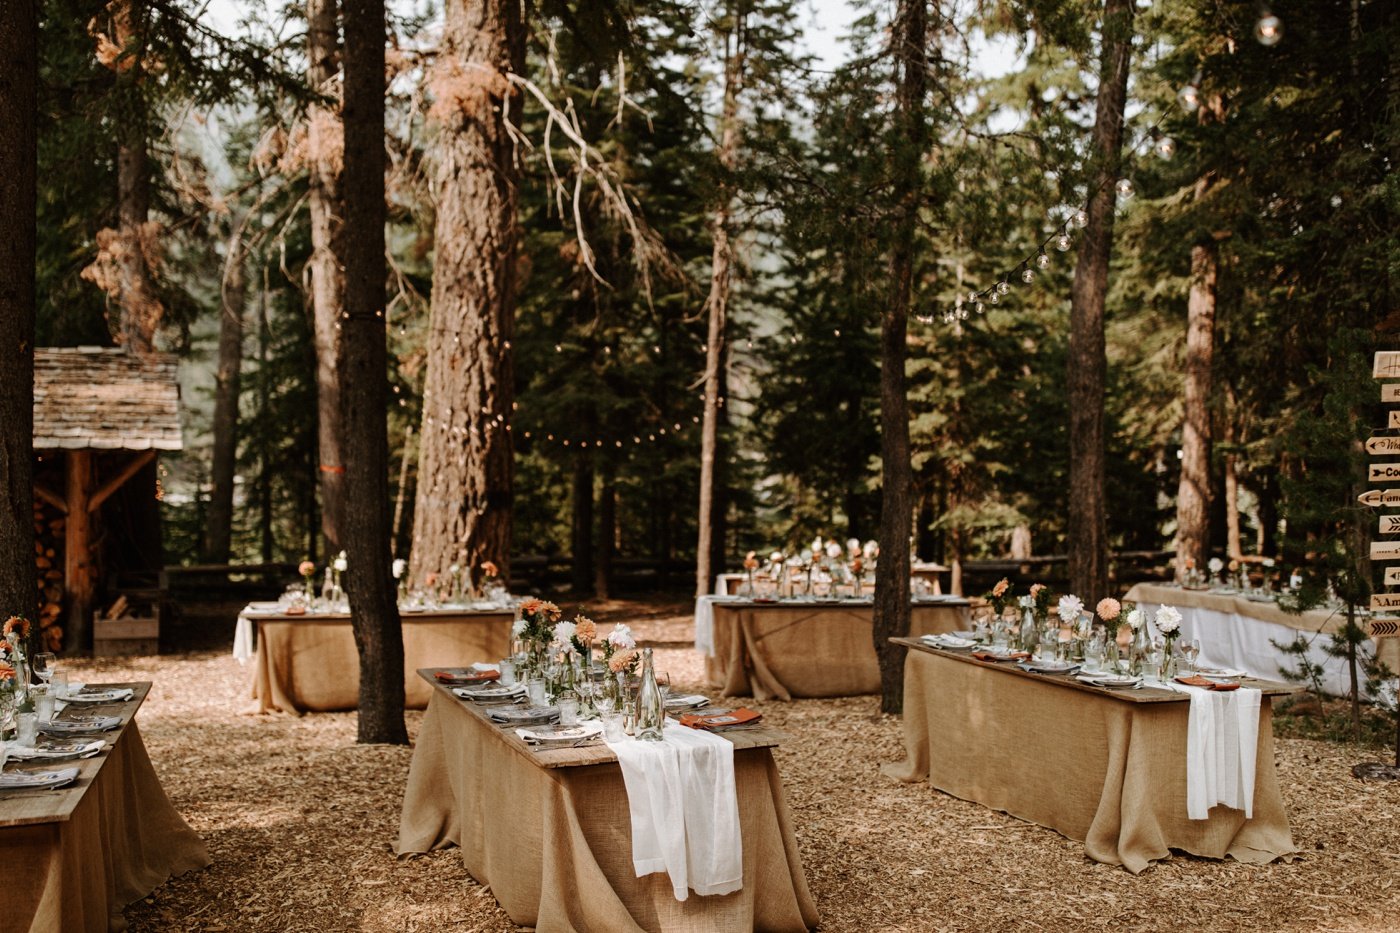 The Top 14 Forest Wedding Venues in the U.S.